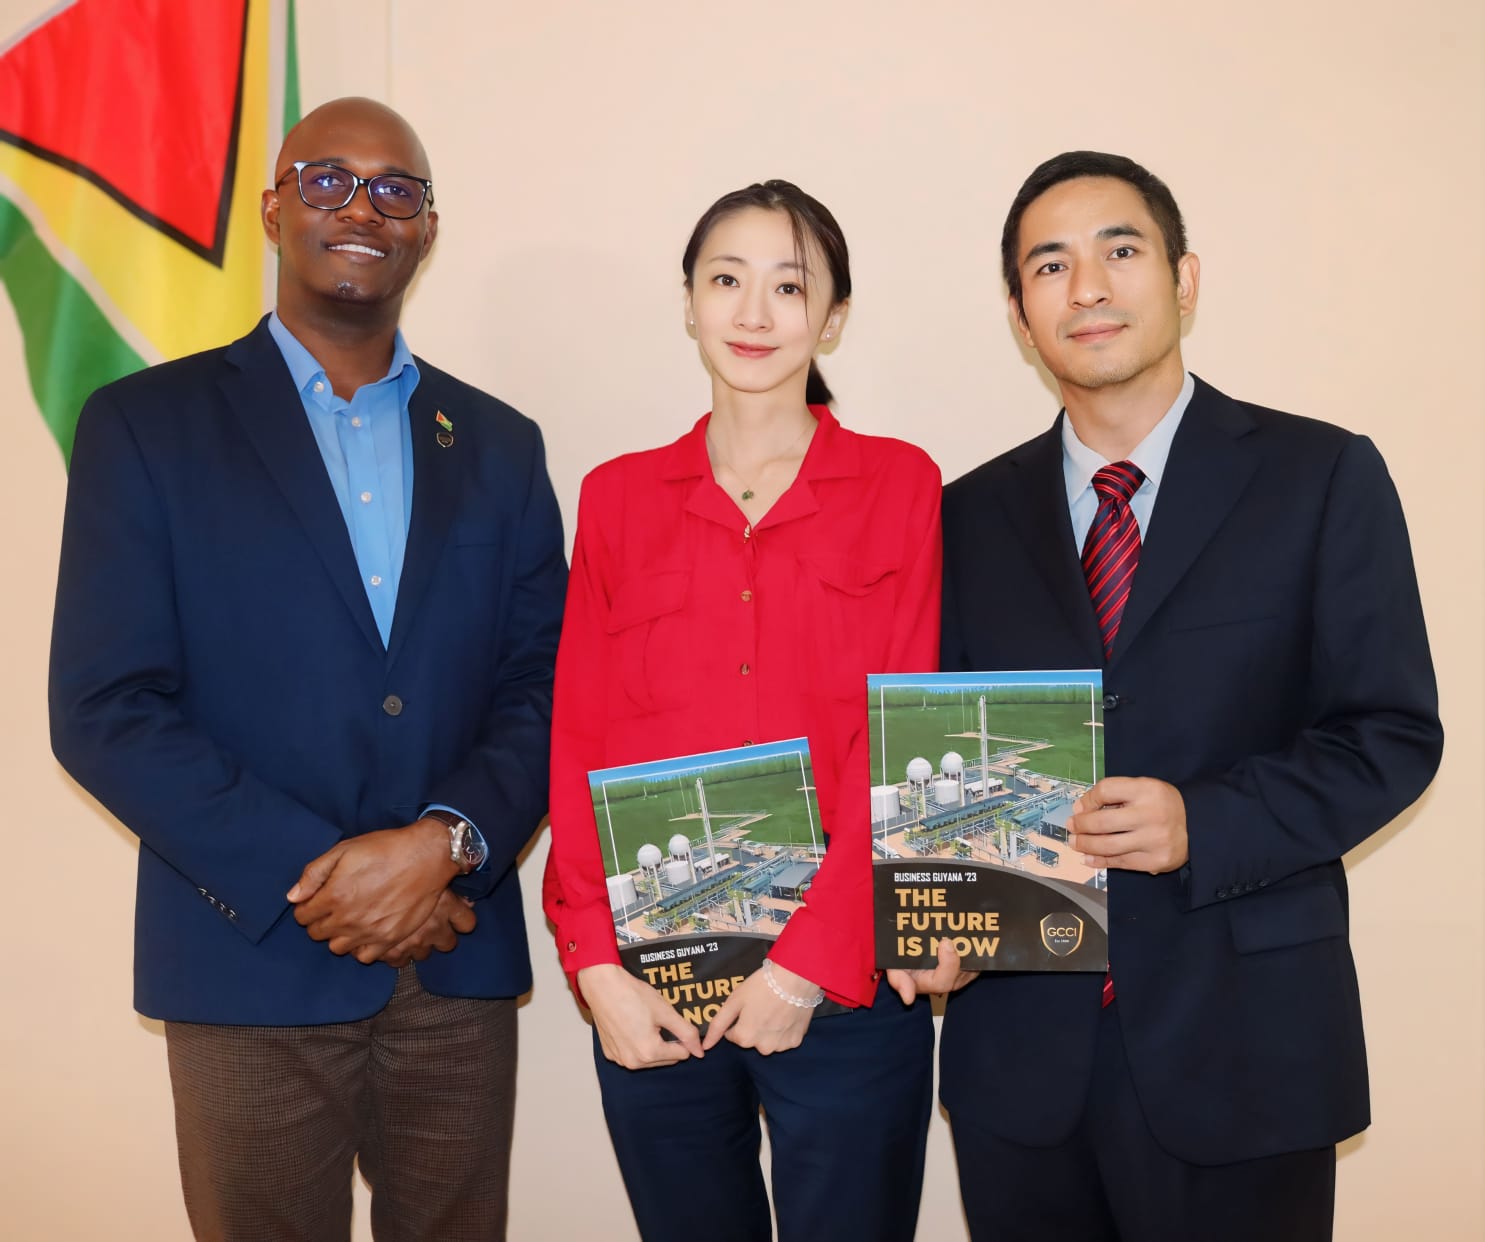 GCCI meets with Chinese Embassy to discuss potential participation of Guyanese businesses at China’s upcoming Canton Fair